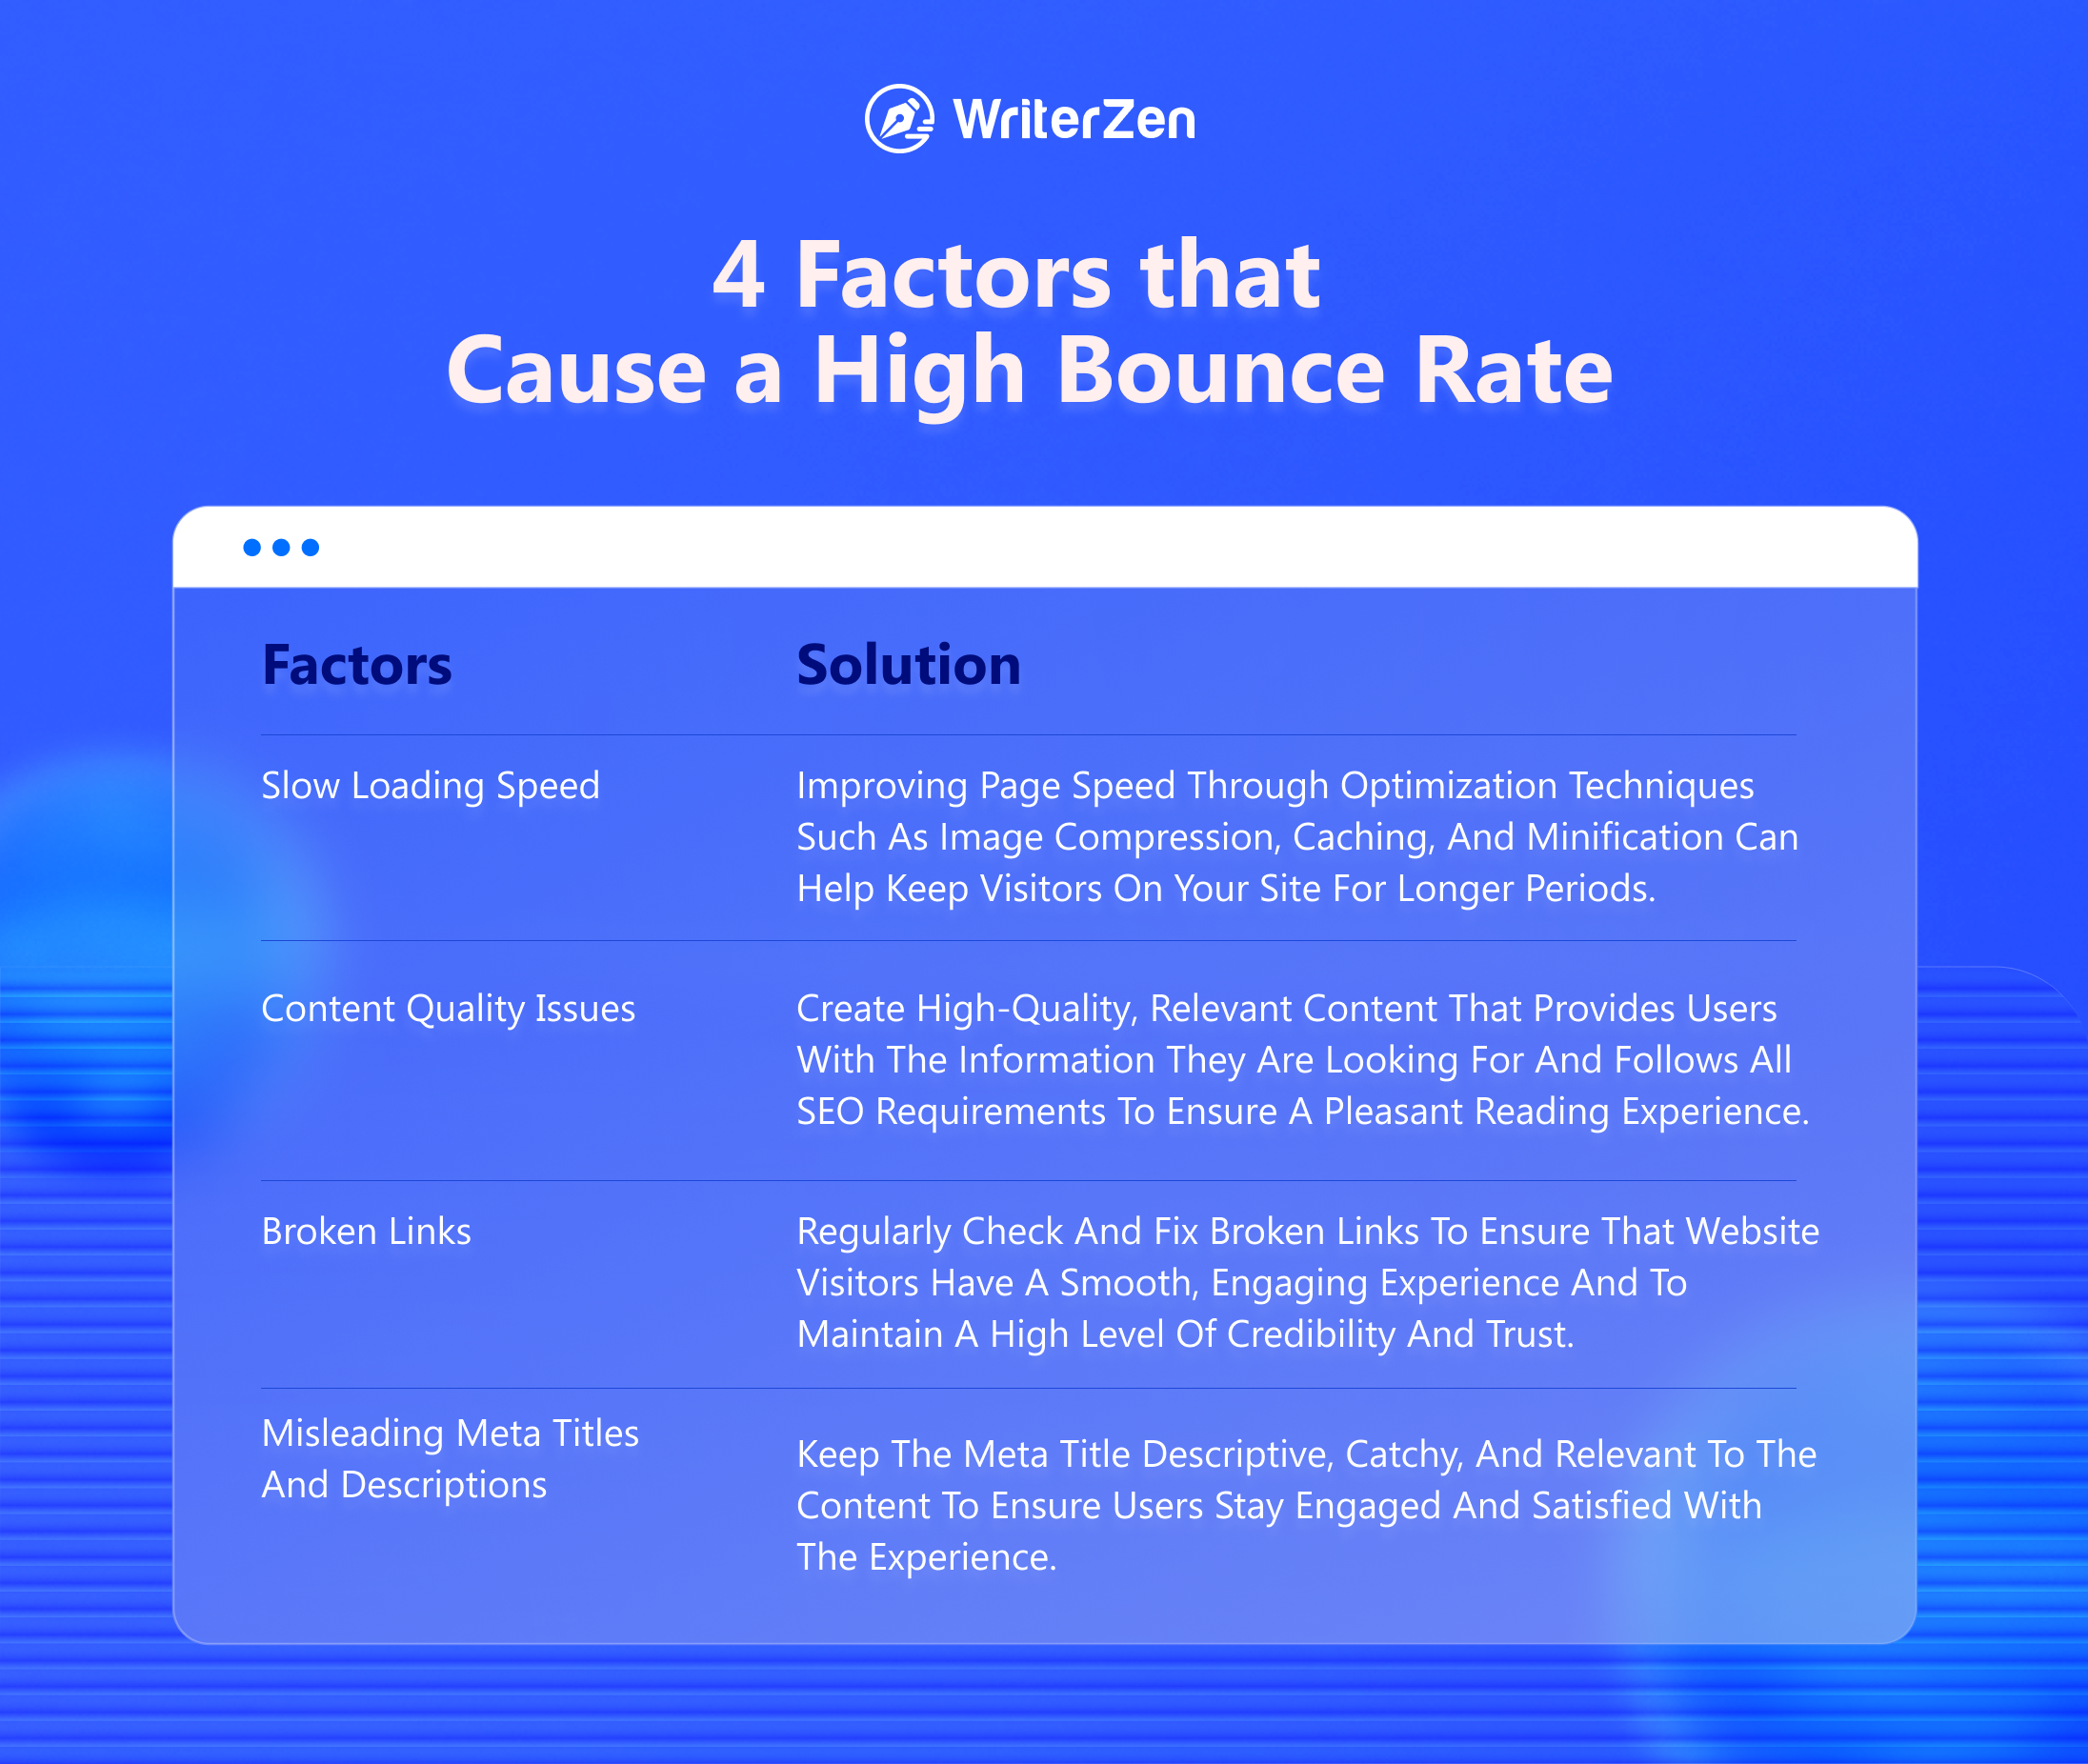 Four Factors that Cause a High Bounce Rate